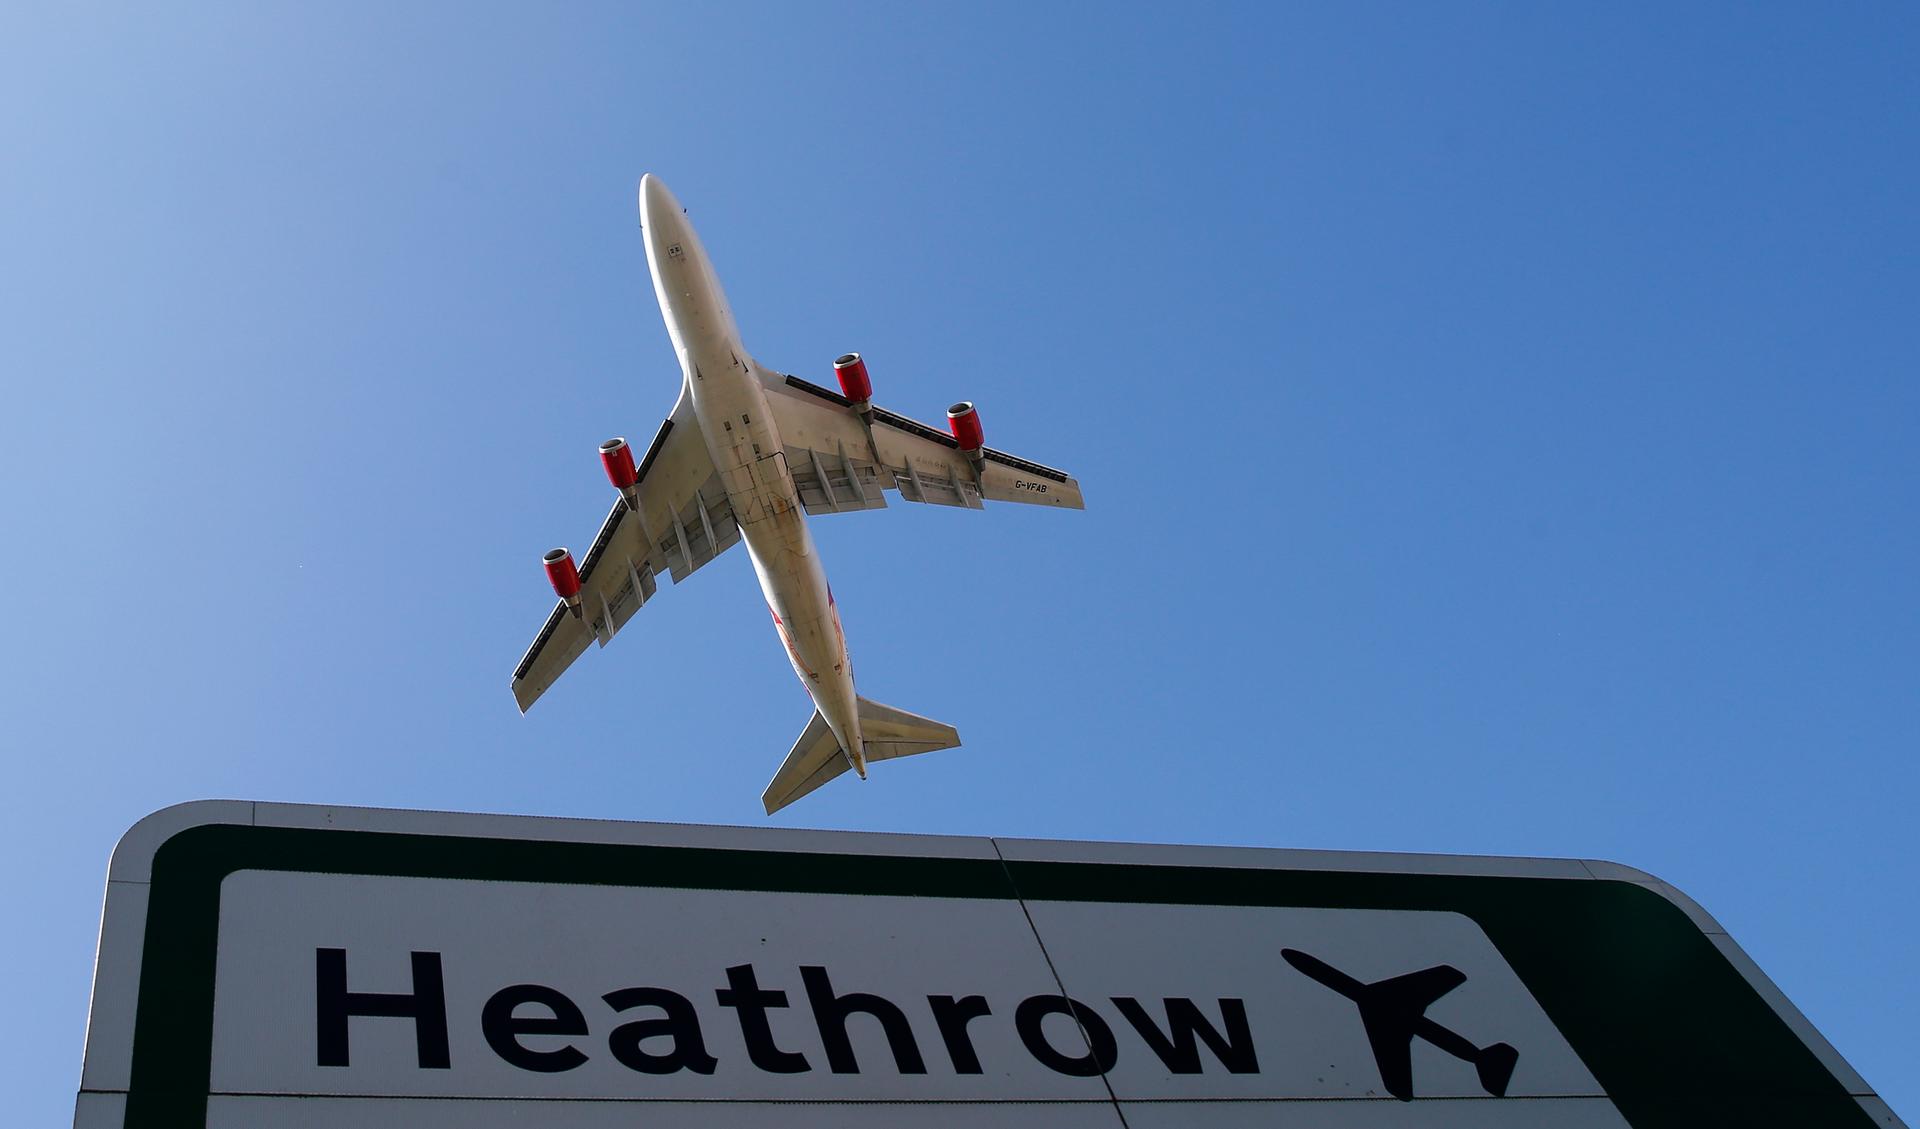 An aircraft takes off from Heathrow Airport in west London.